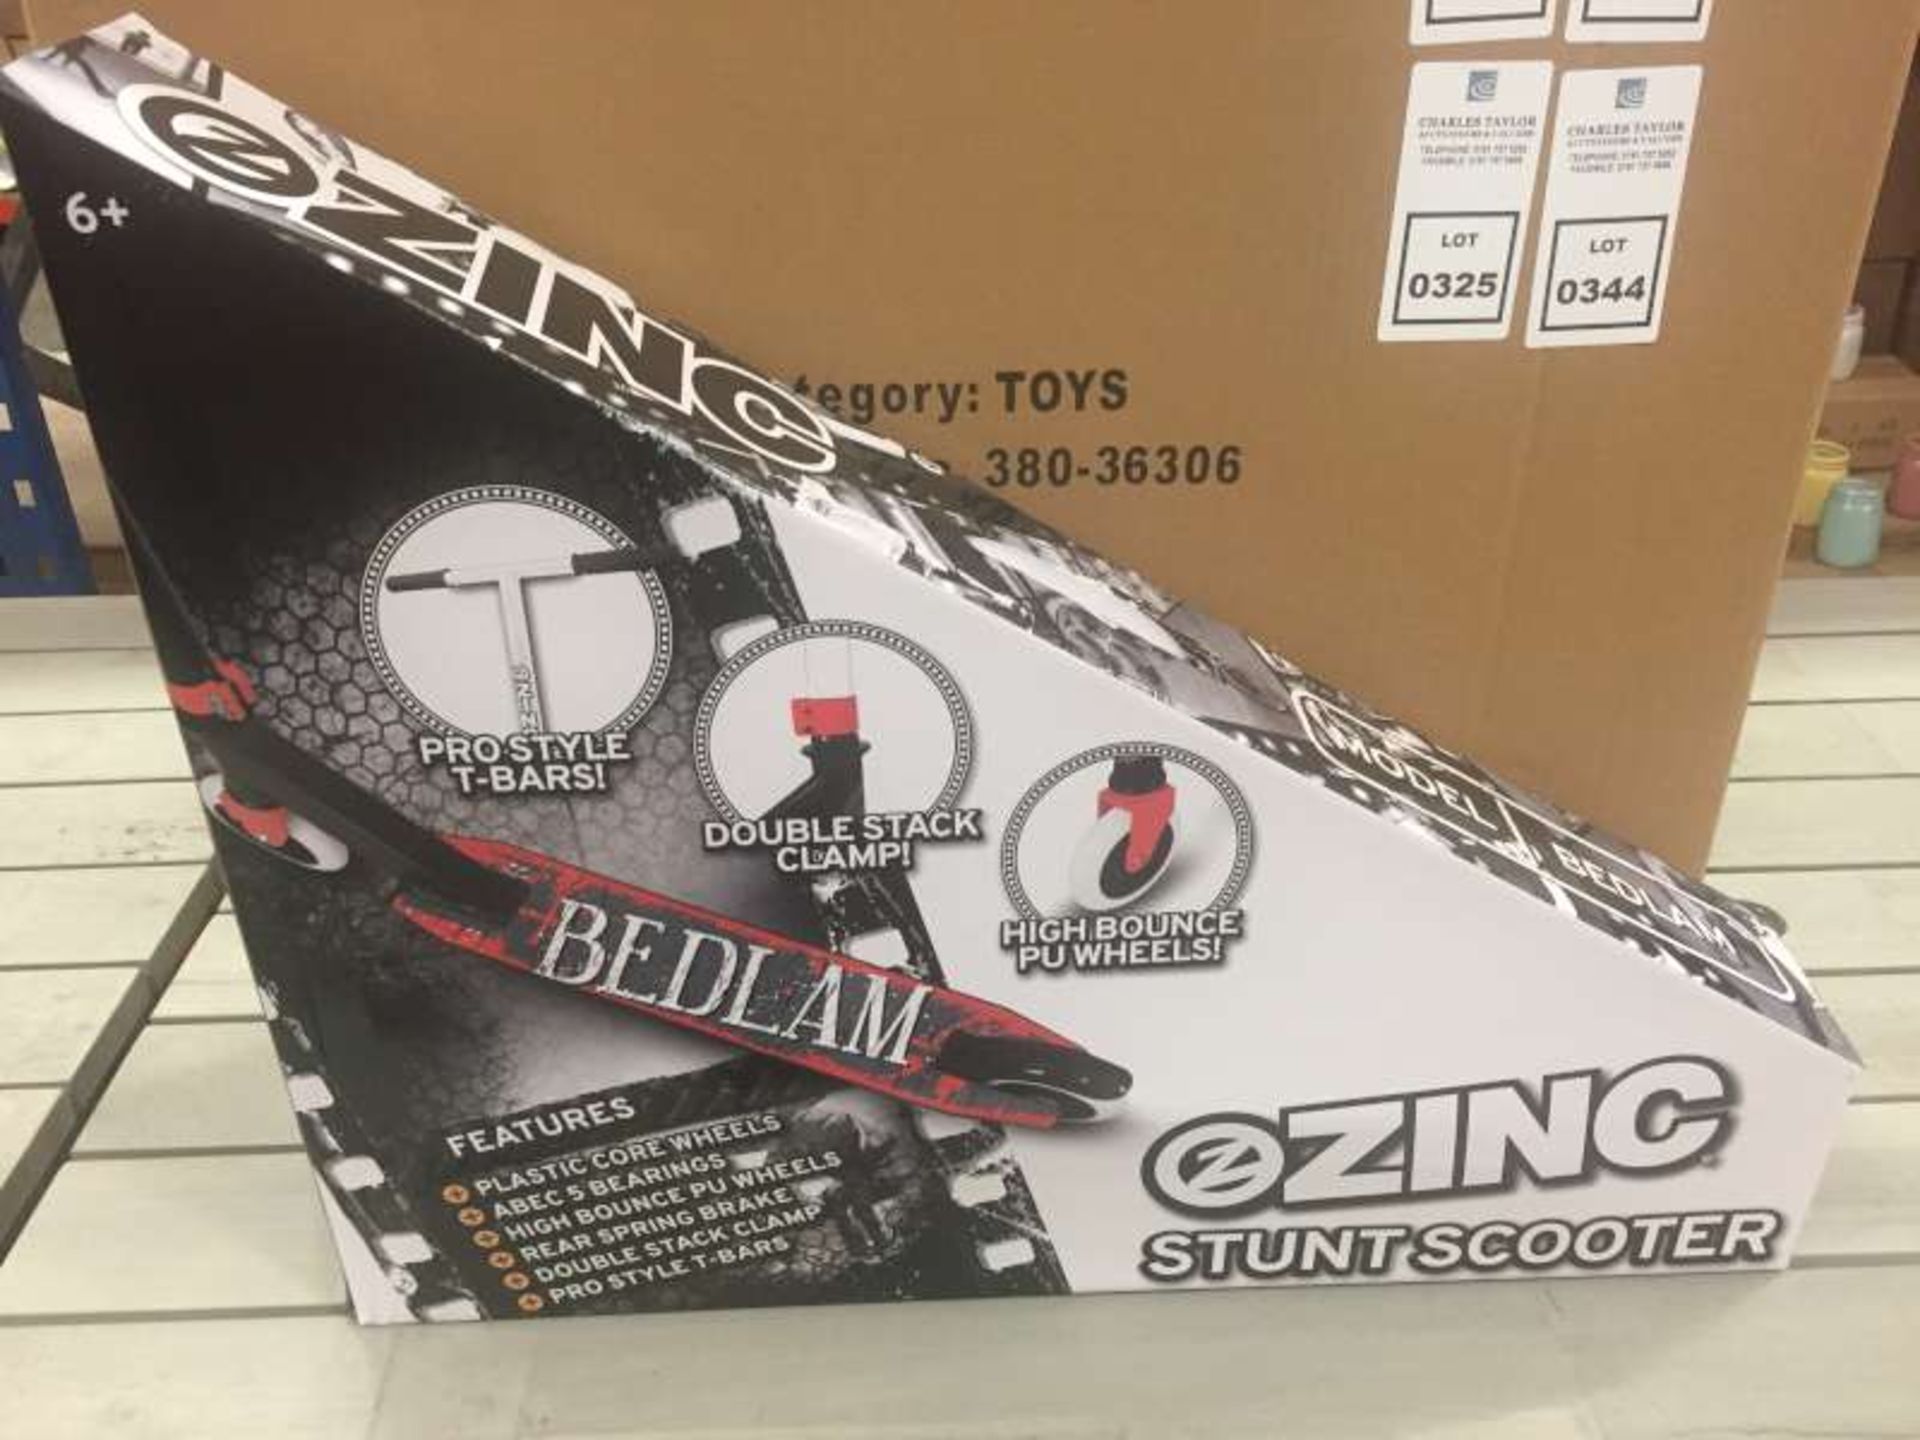 6 X BRAND NEW BOXED ZINC BEDLAM STUNT SCOOTERS IN 3 BOXES